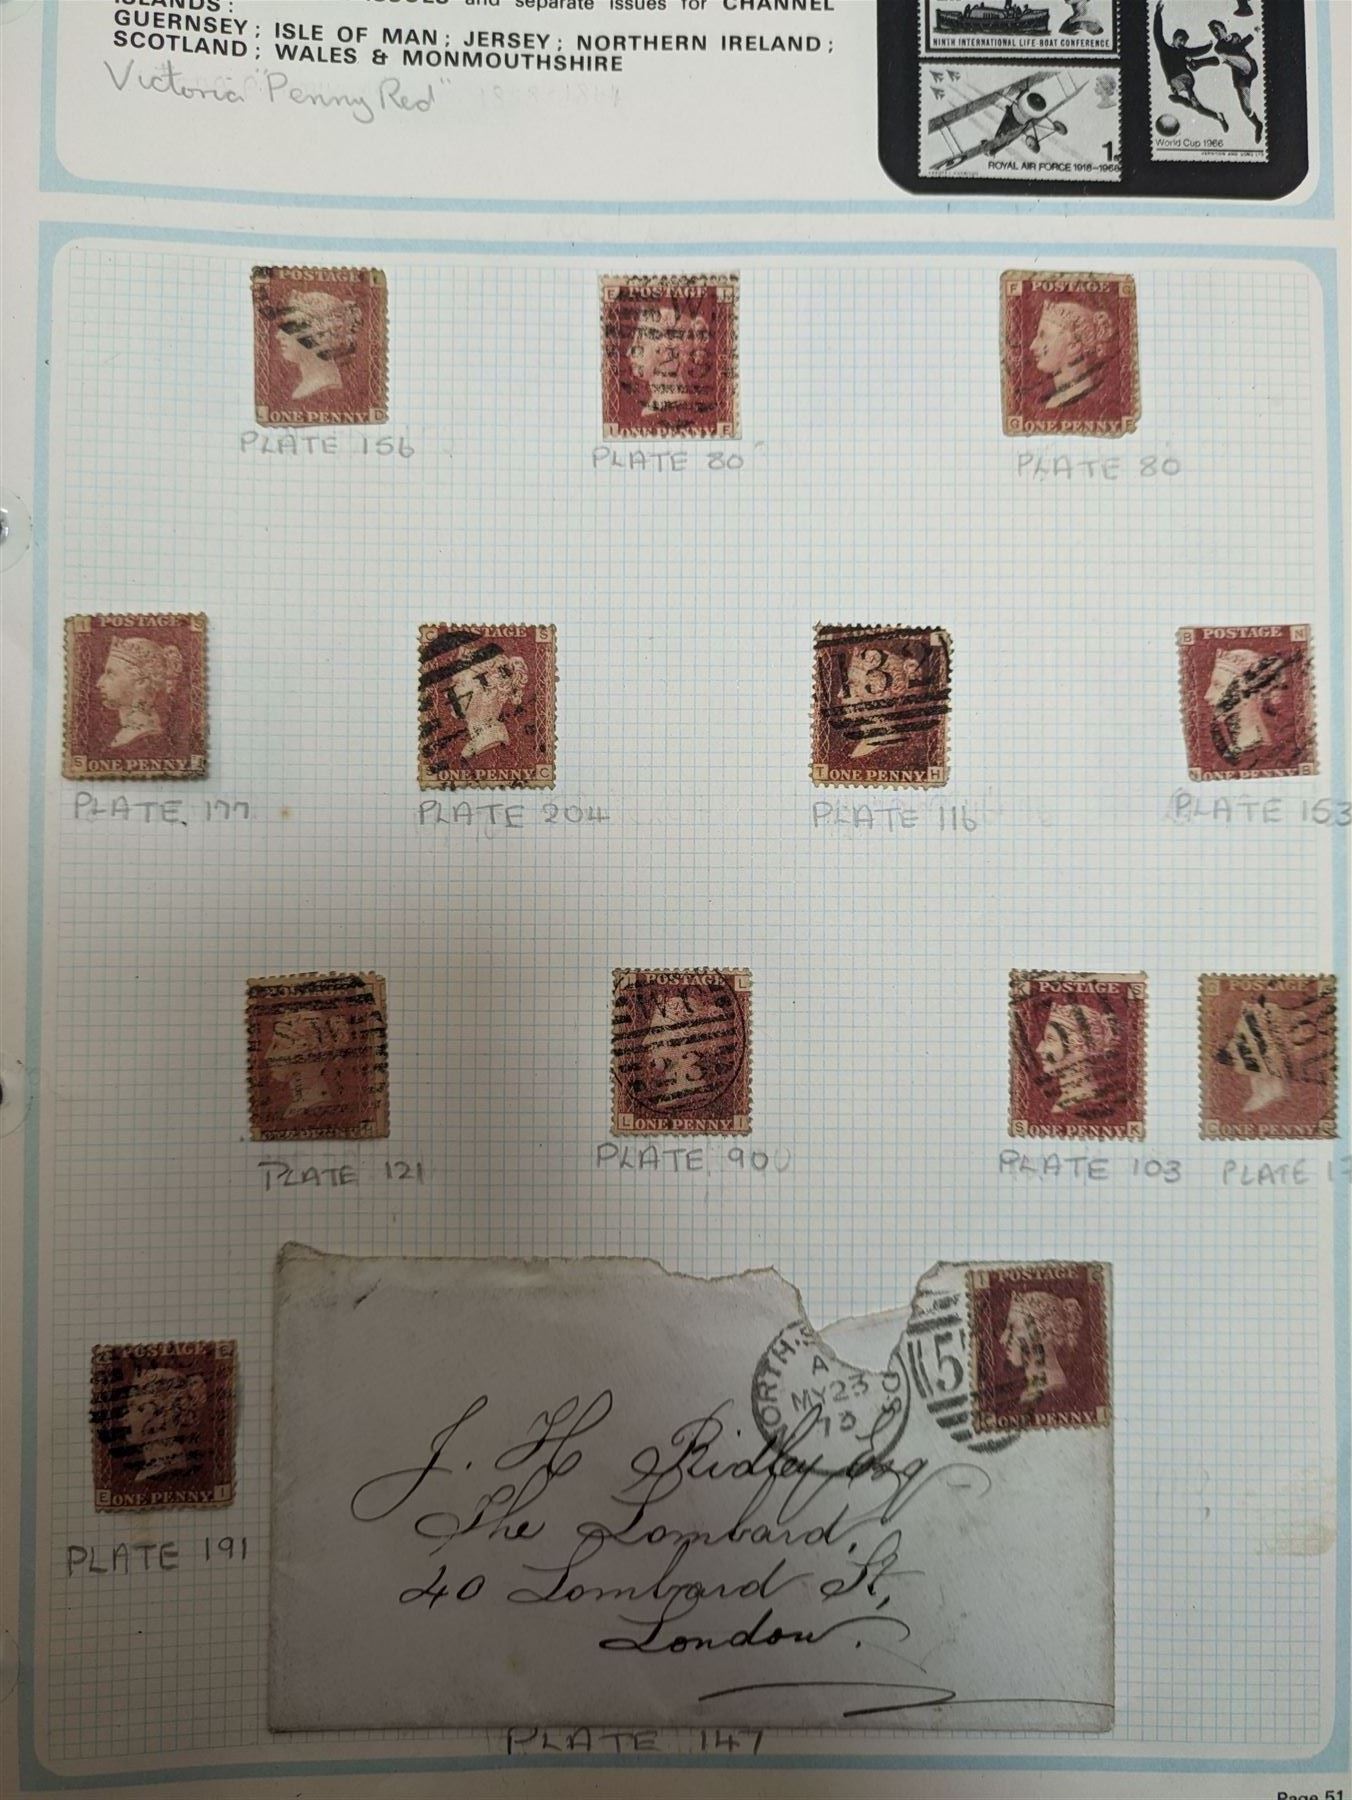 Mostly Great British stamps including Queen Victoria perf penny reds - Image 4 of 4